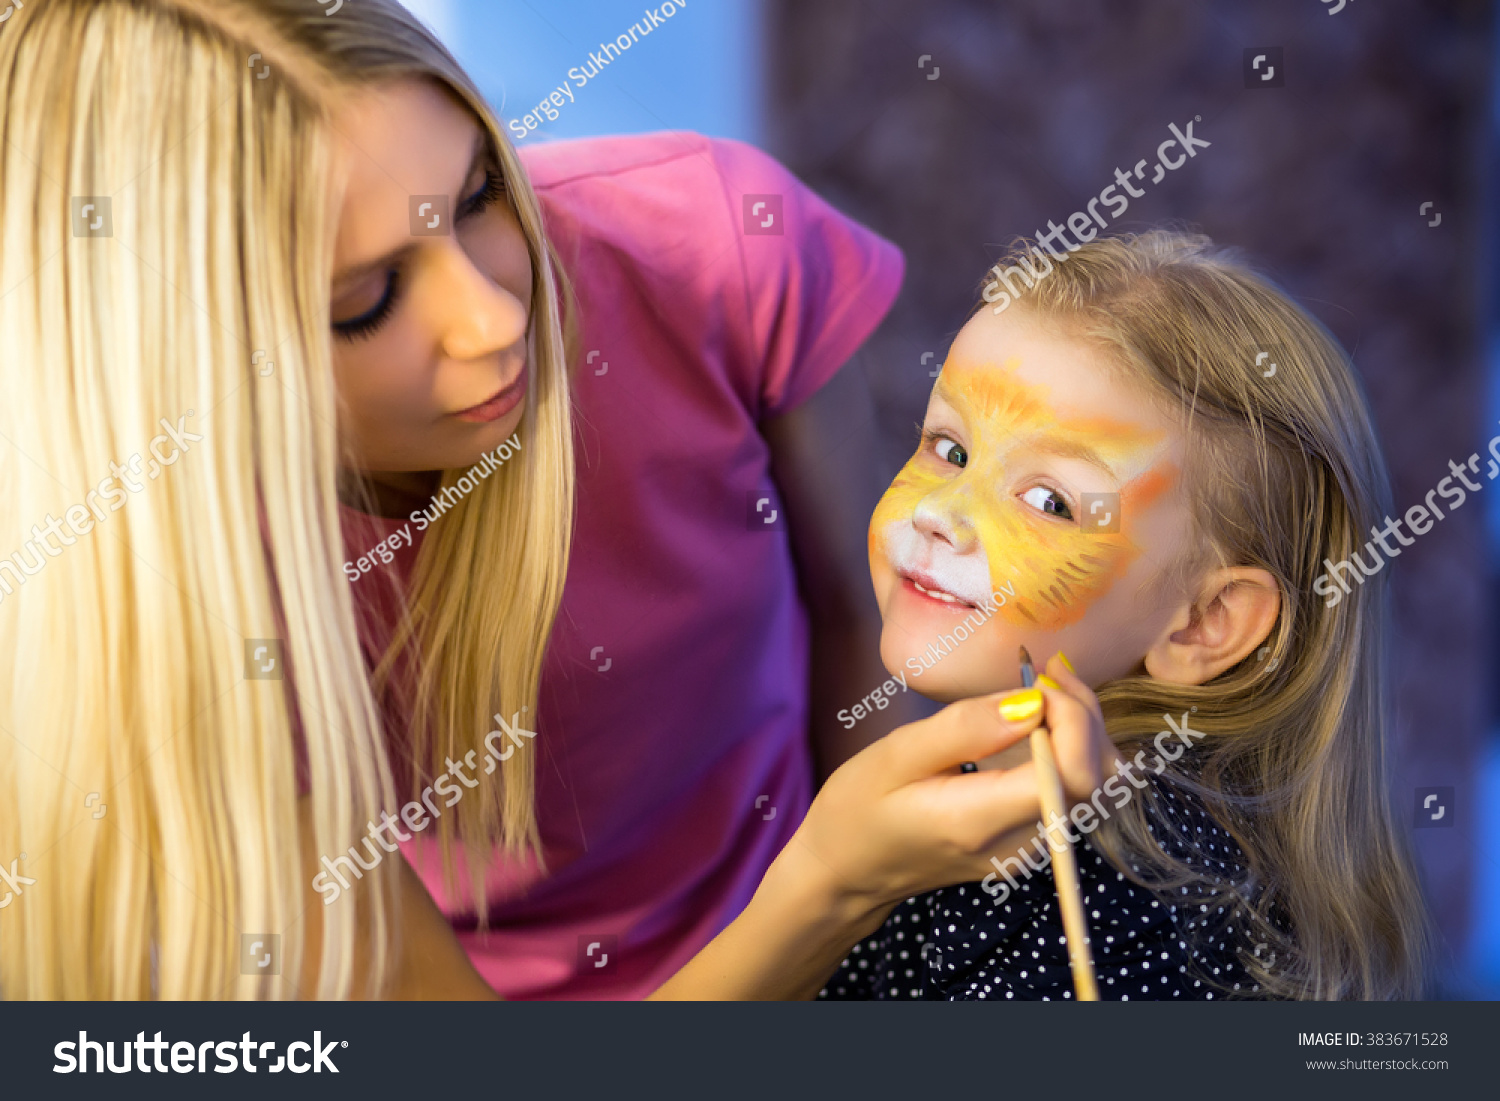 Pretty blond woman painting the face of a little girl #383671528